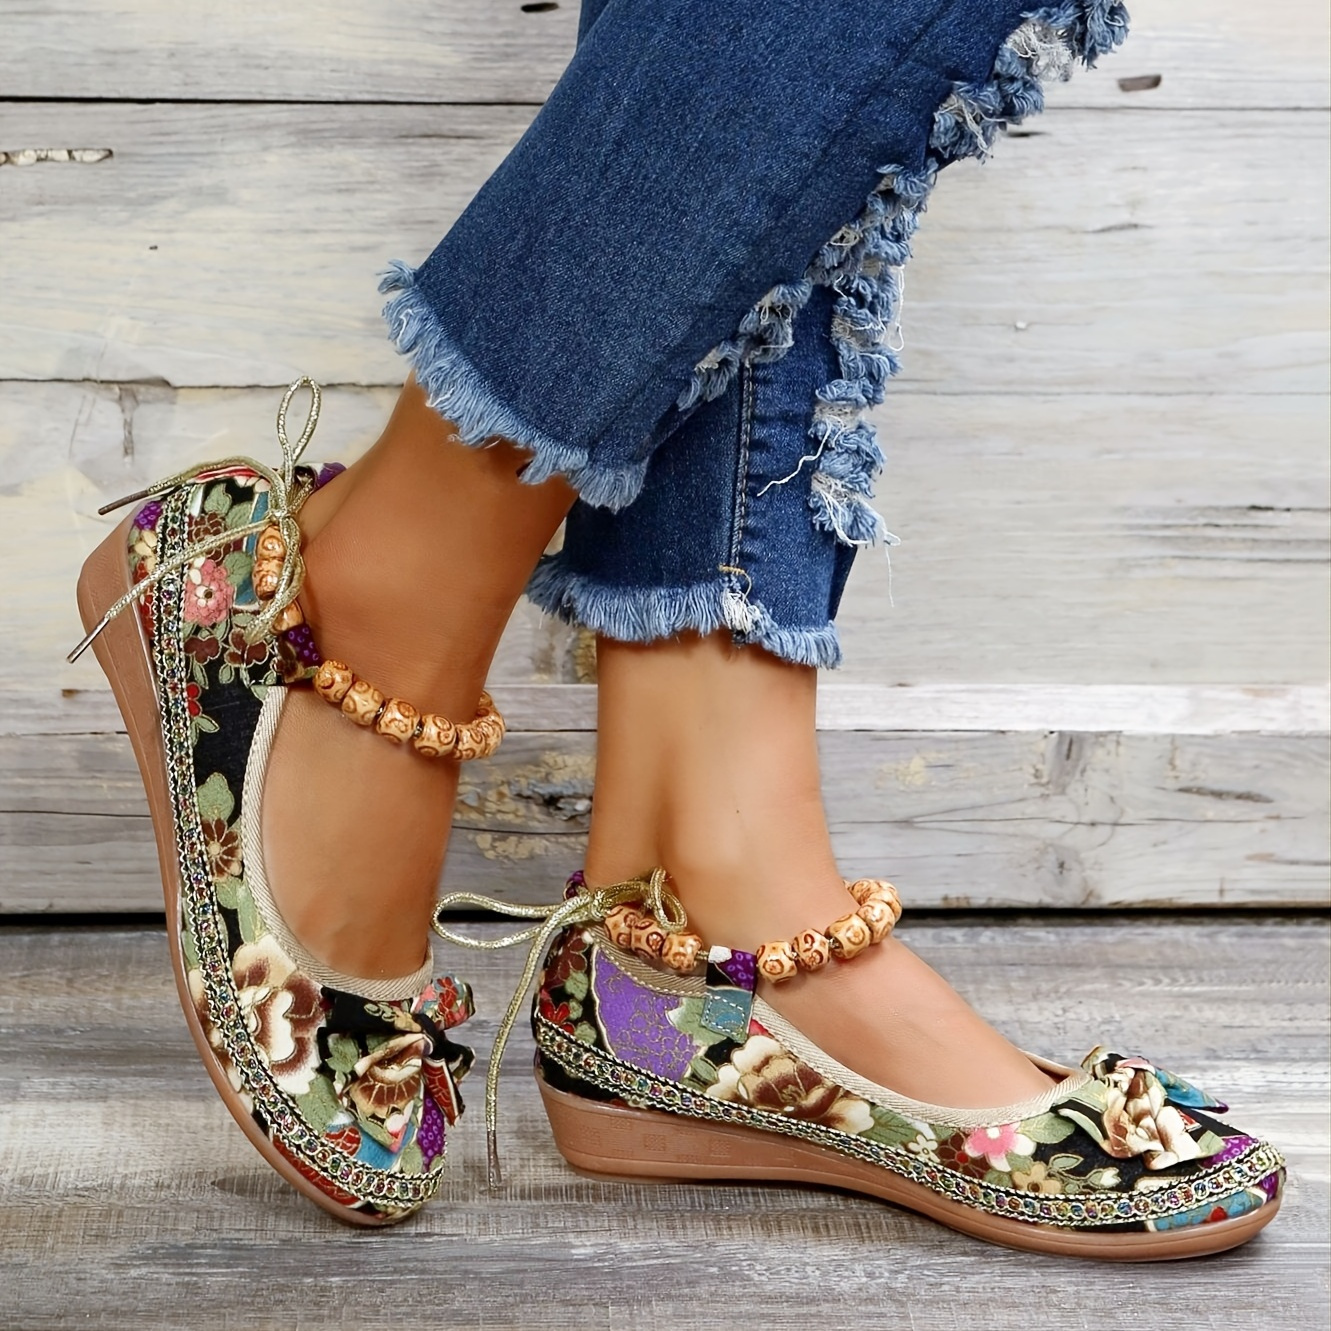 Floral Shoes Casual Flats - Buy Floral Shoes Casual Flats online